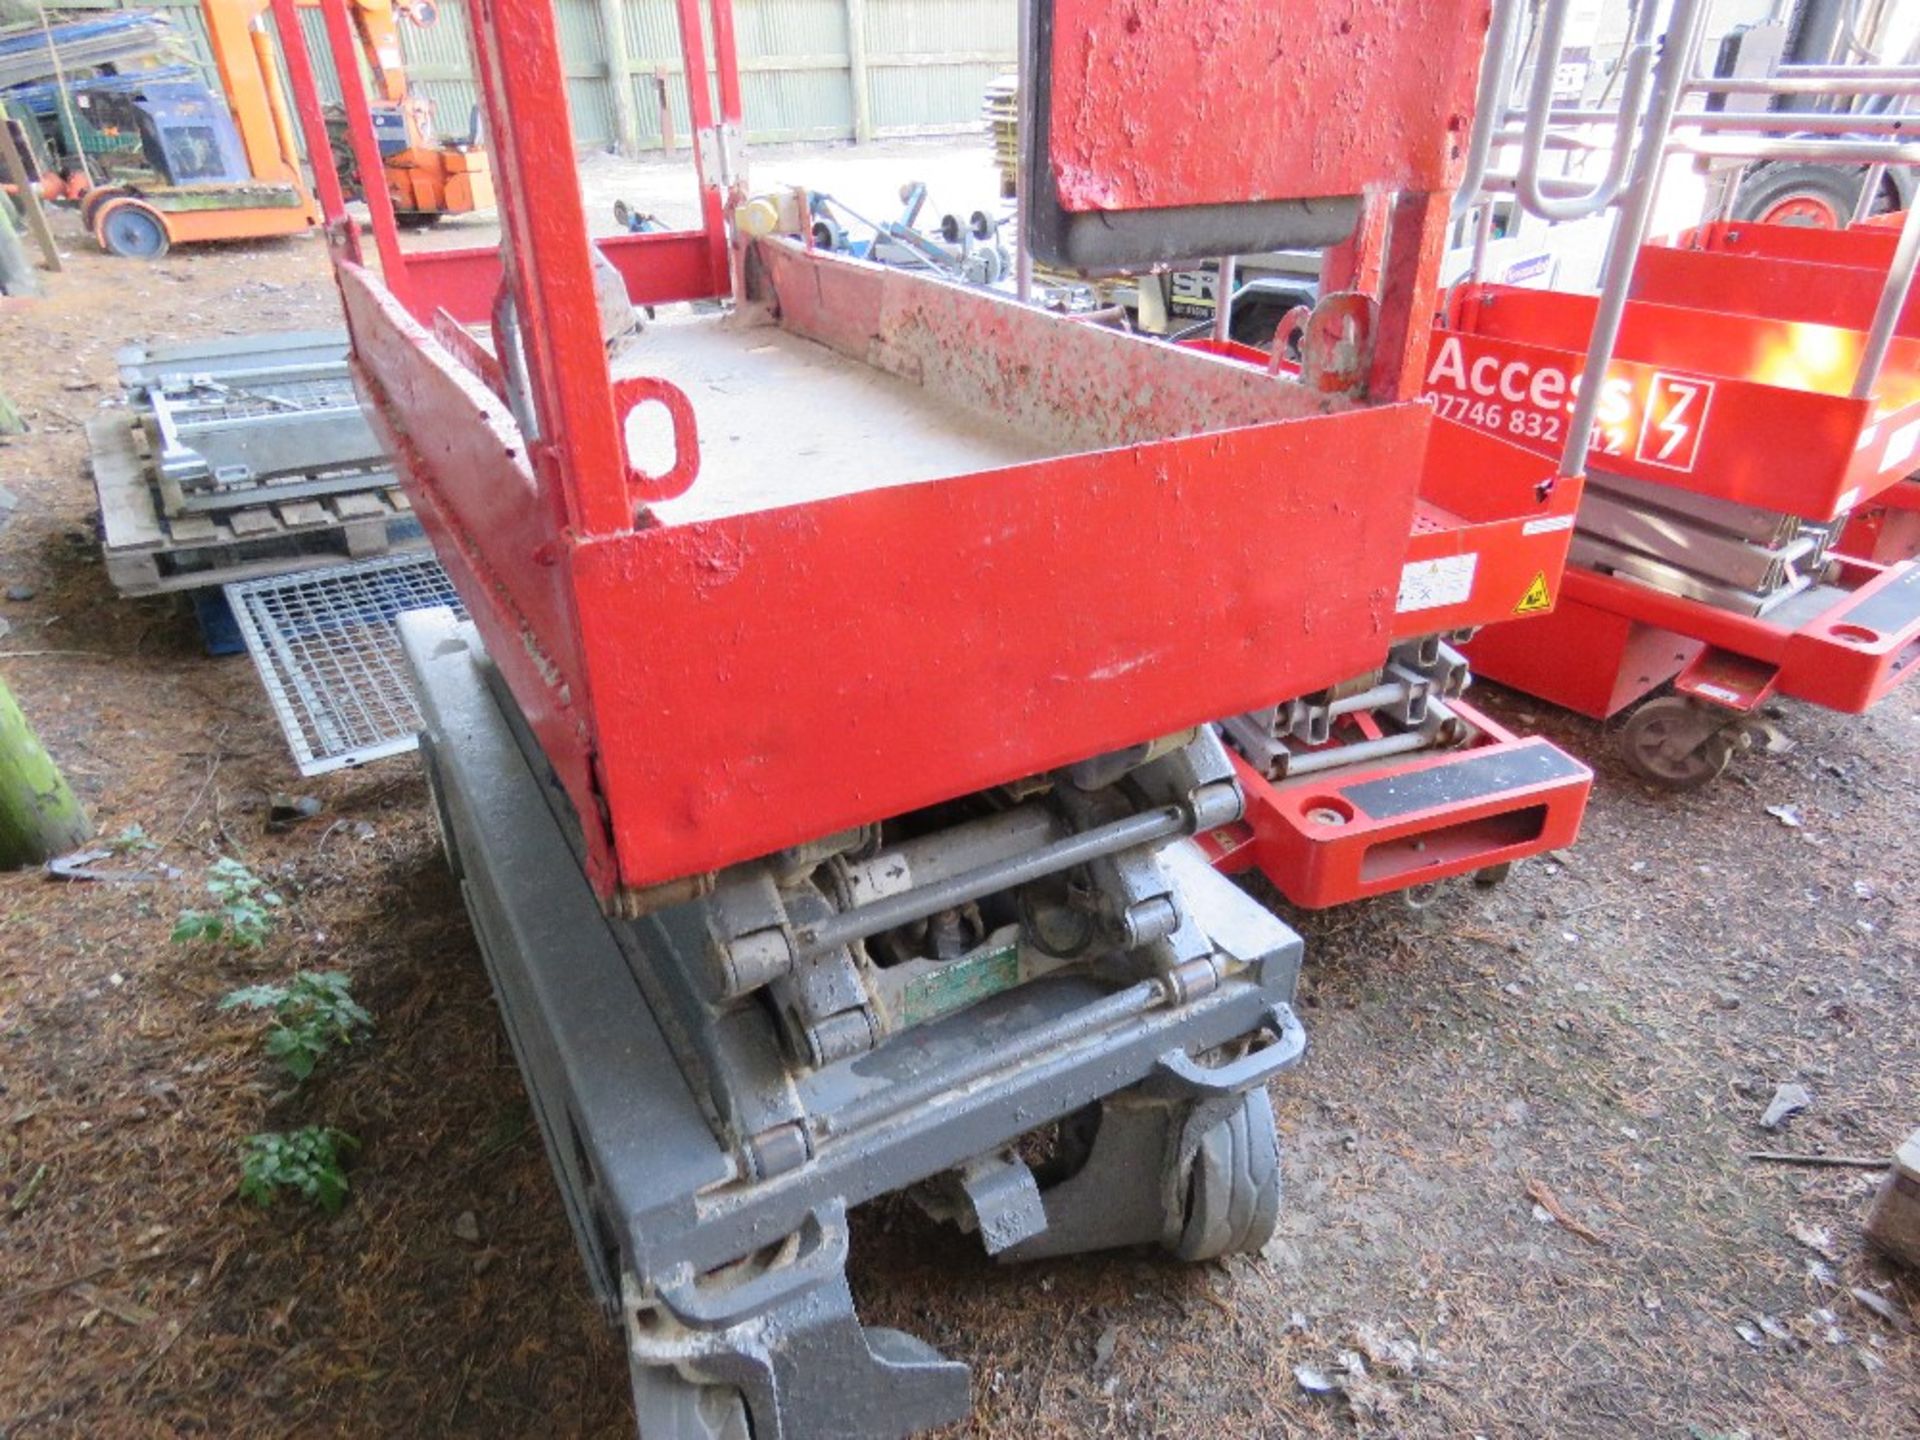 SKYJACK 3219 SCISSOR LIFT ACCESS PLATFORM, YEAR 2010. SN:22020000. UNTESTED, BATTERY FLAT WHEN DELIV - Image 6 of 6